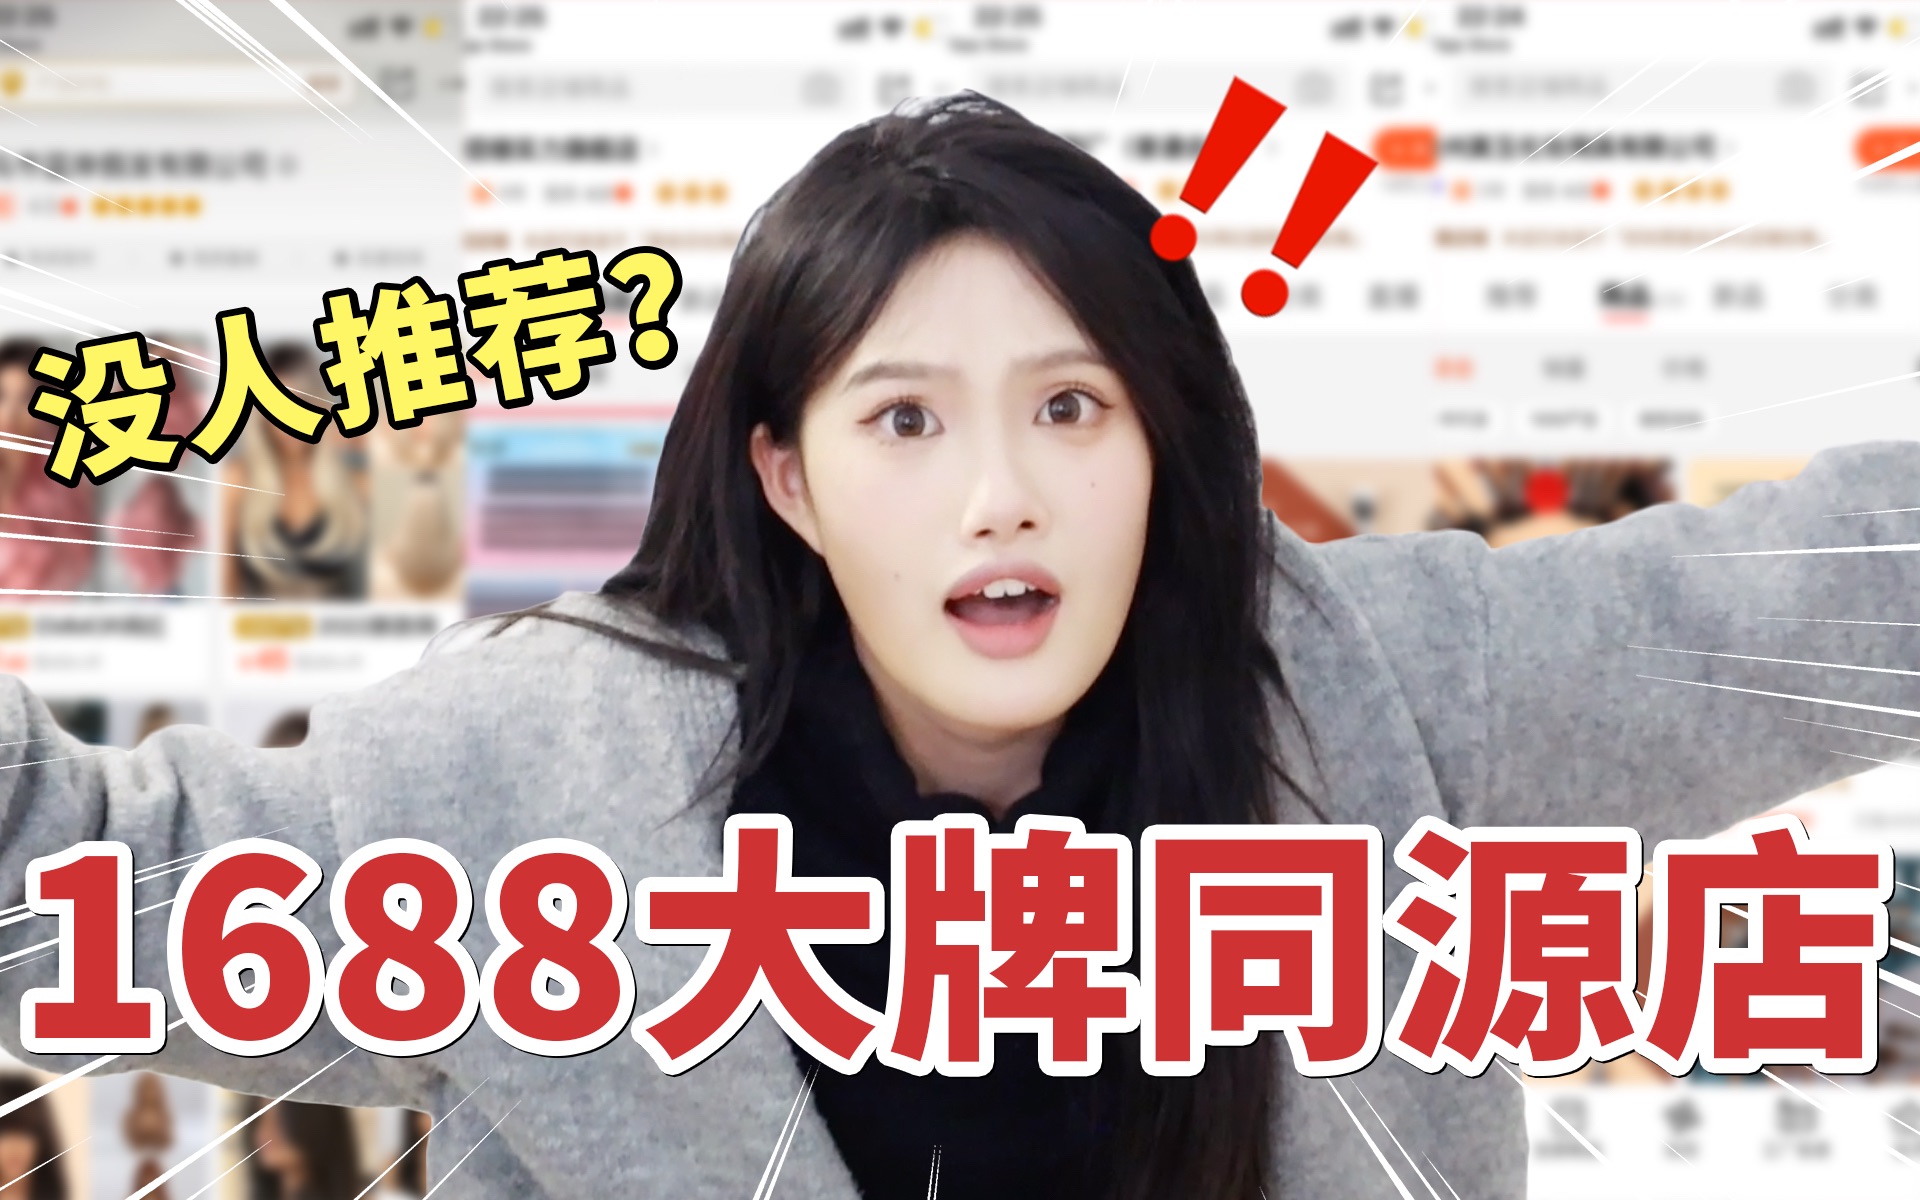 How to Buy from 1688 Outside of China: A Full Guide